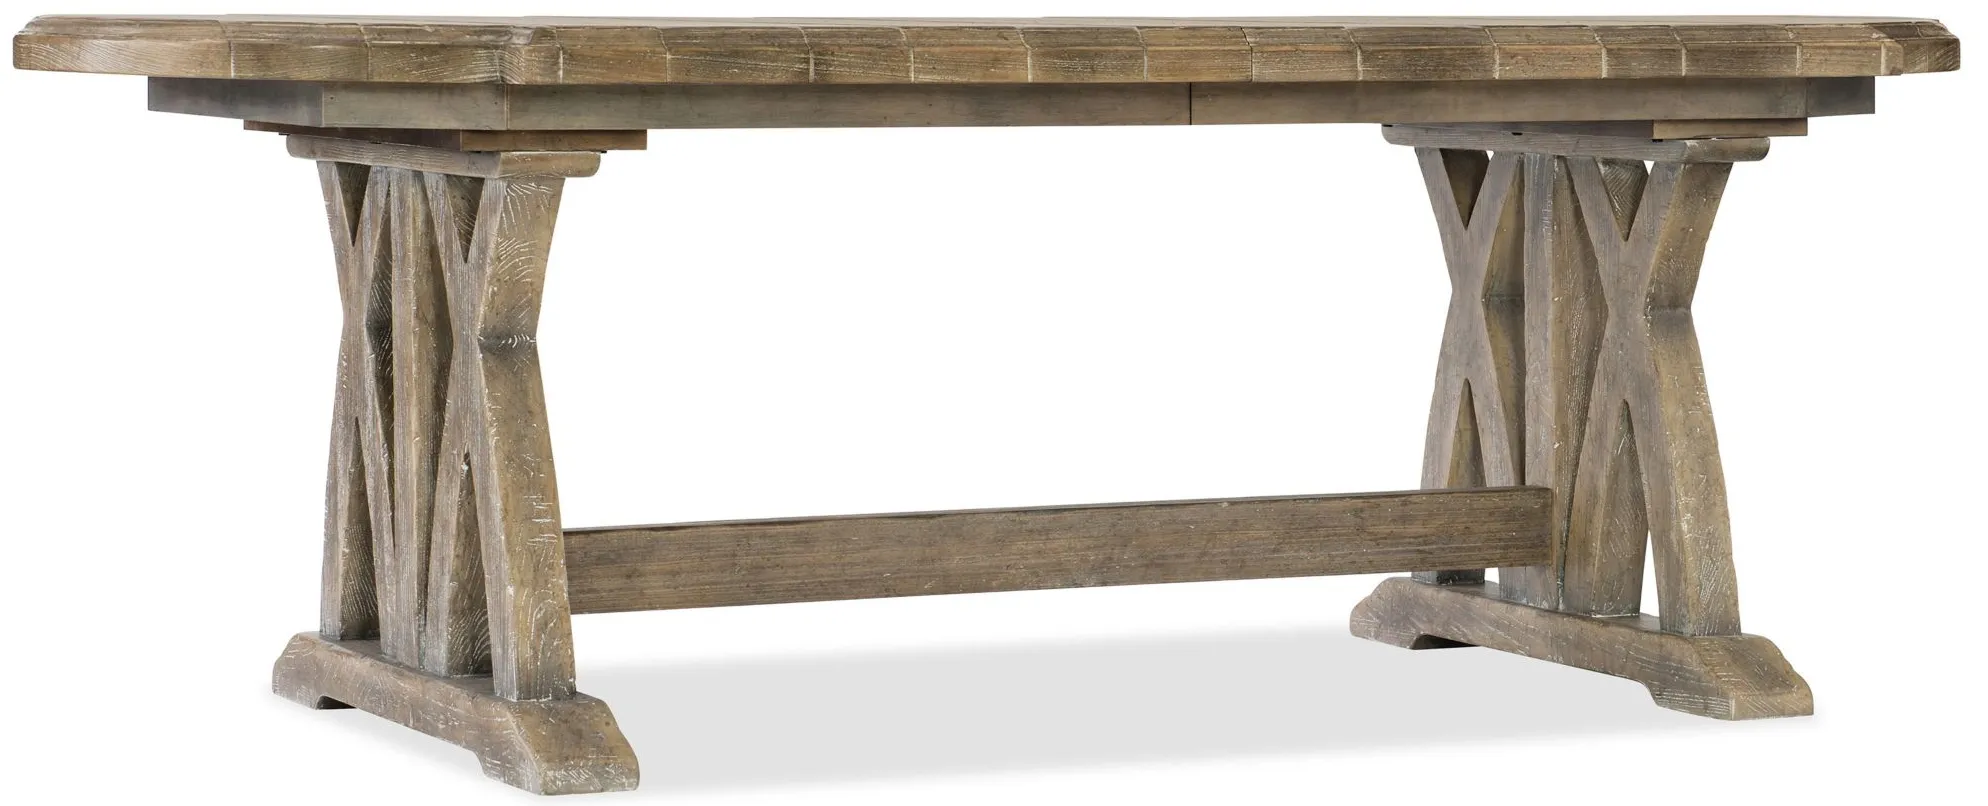 Boheme Colibri Rectangular Trestle Dining Table with Leaf in Antique Milk by Hooker Furniture